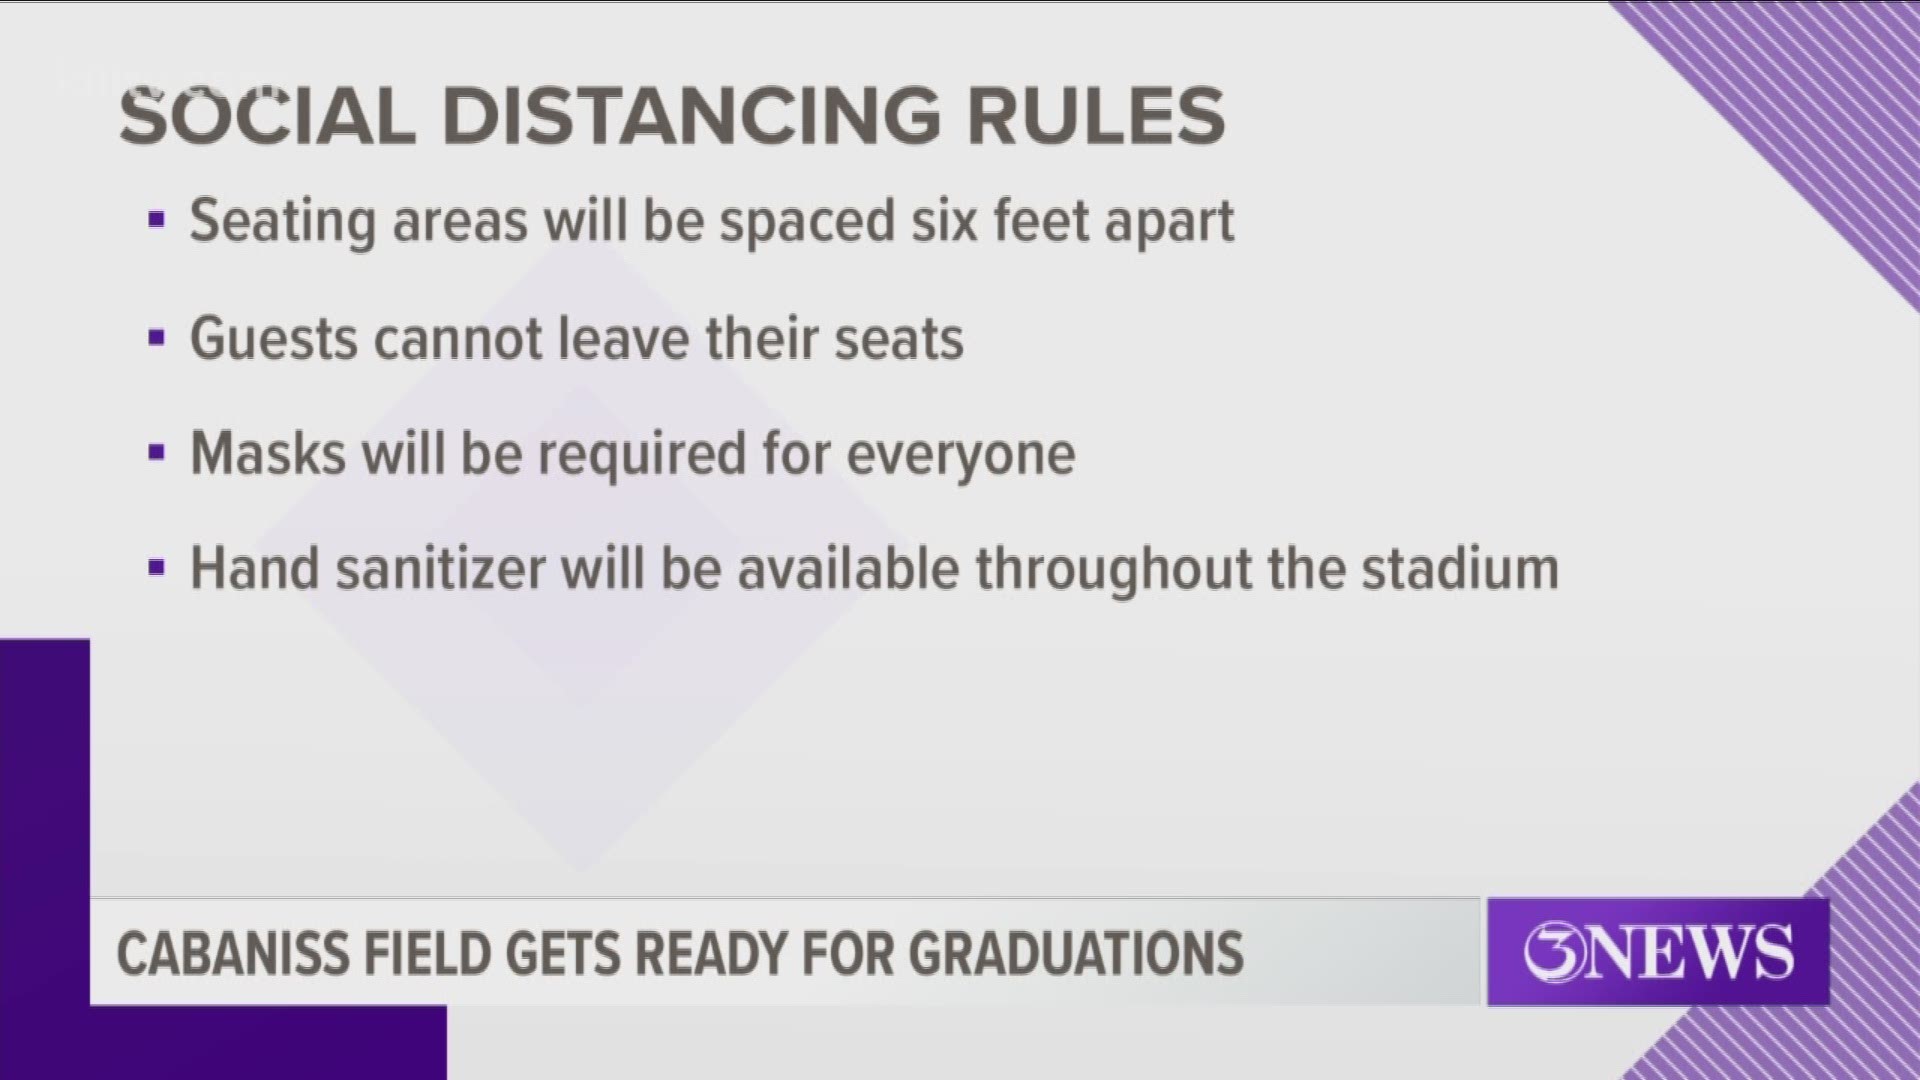 Graduation ceremonies that were postponed because of coronavirus concerns have been allowed to happen in the Coastal Bend.